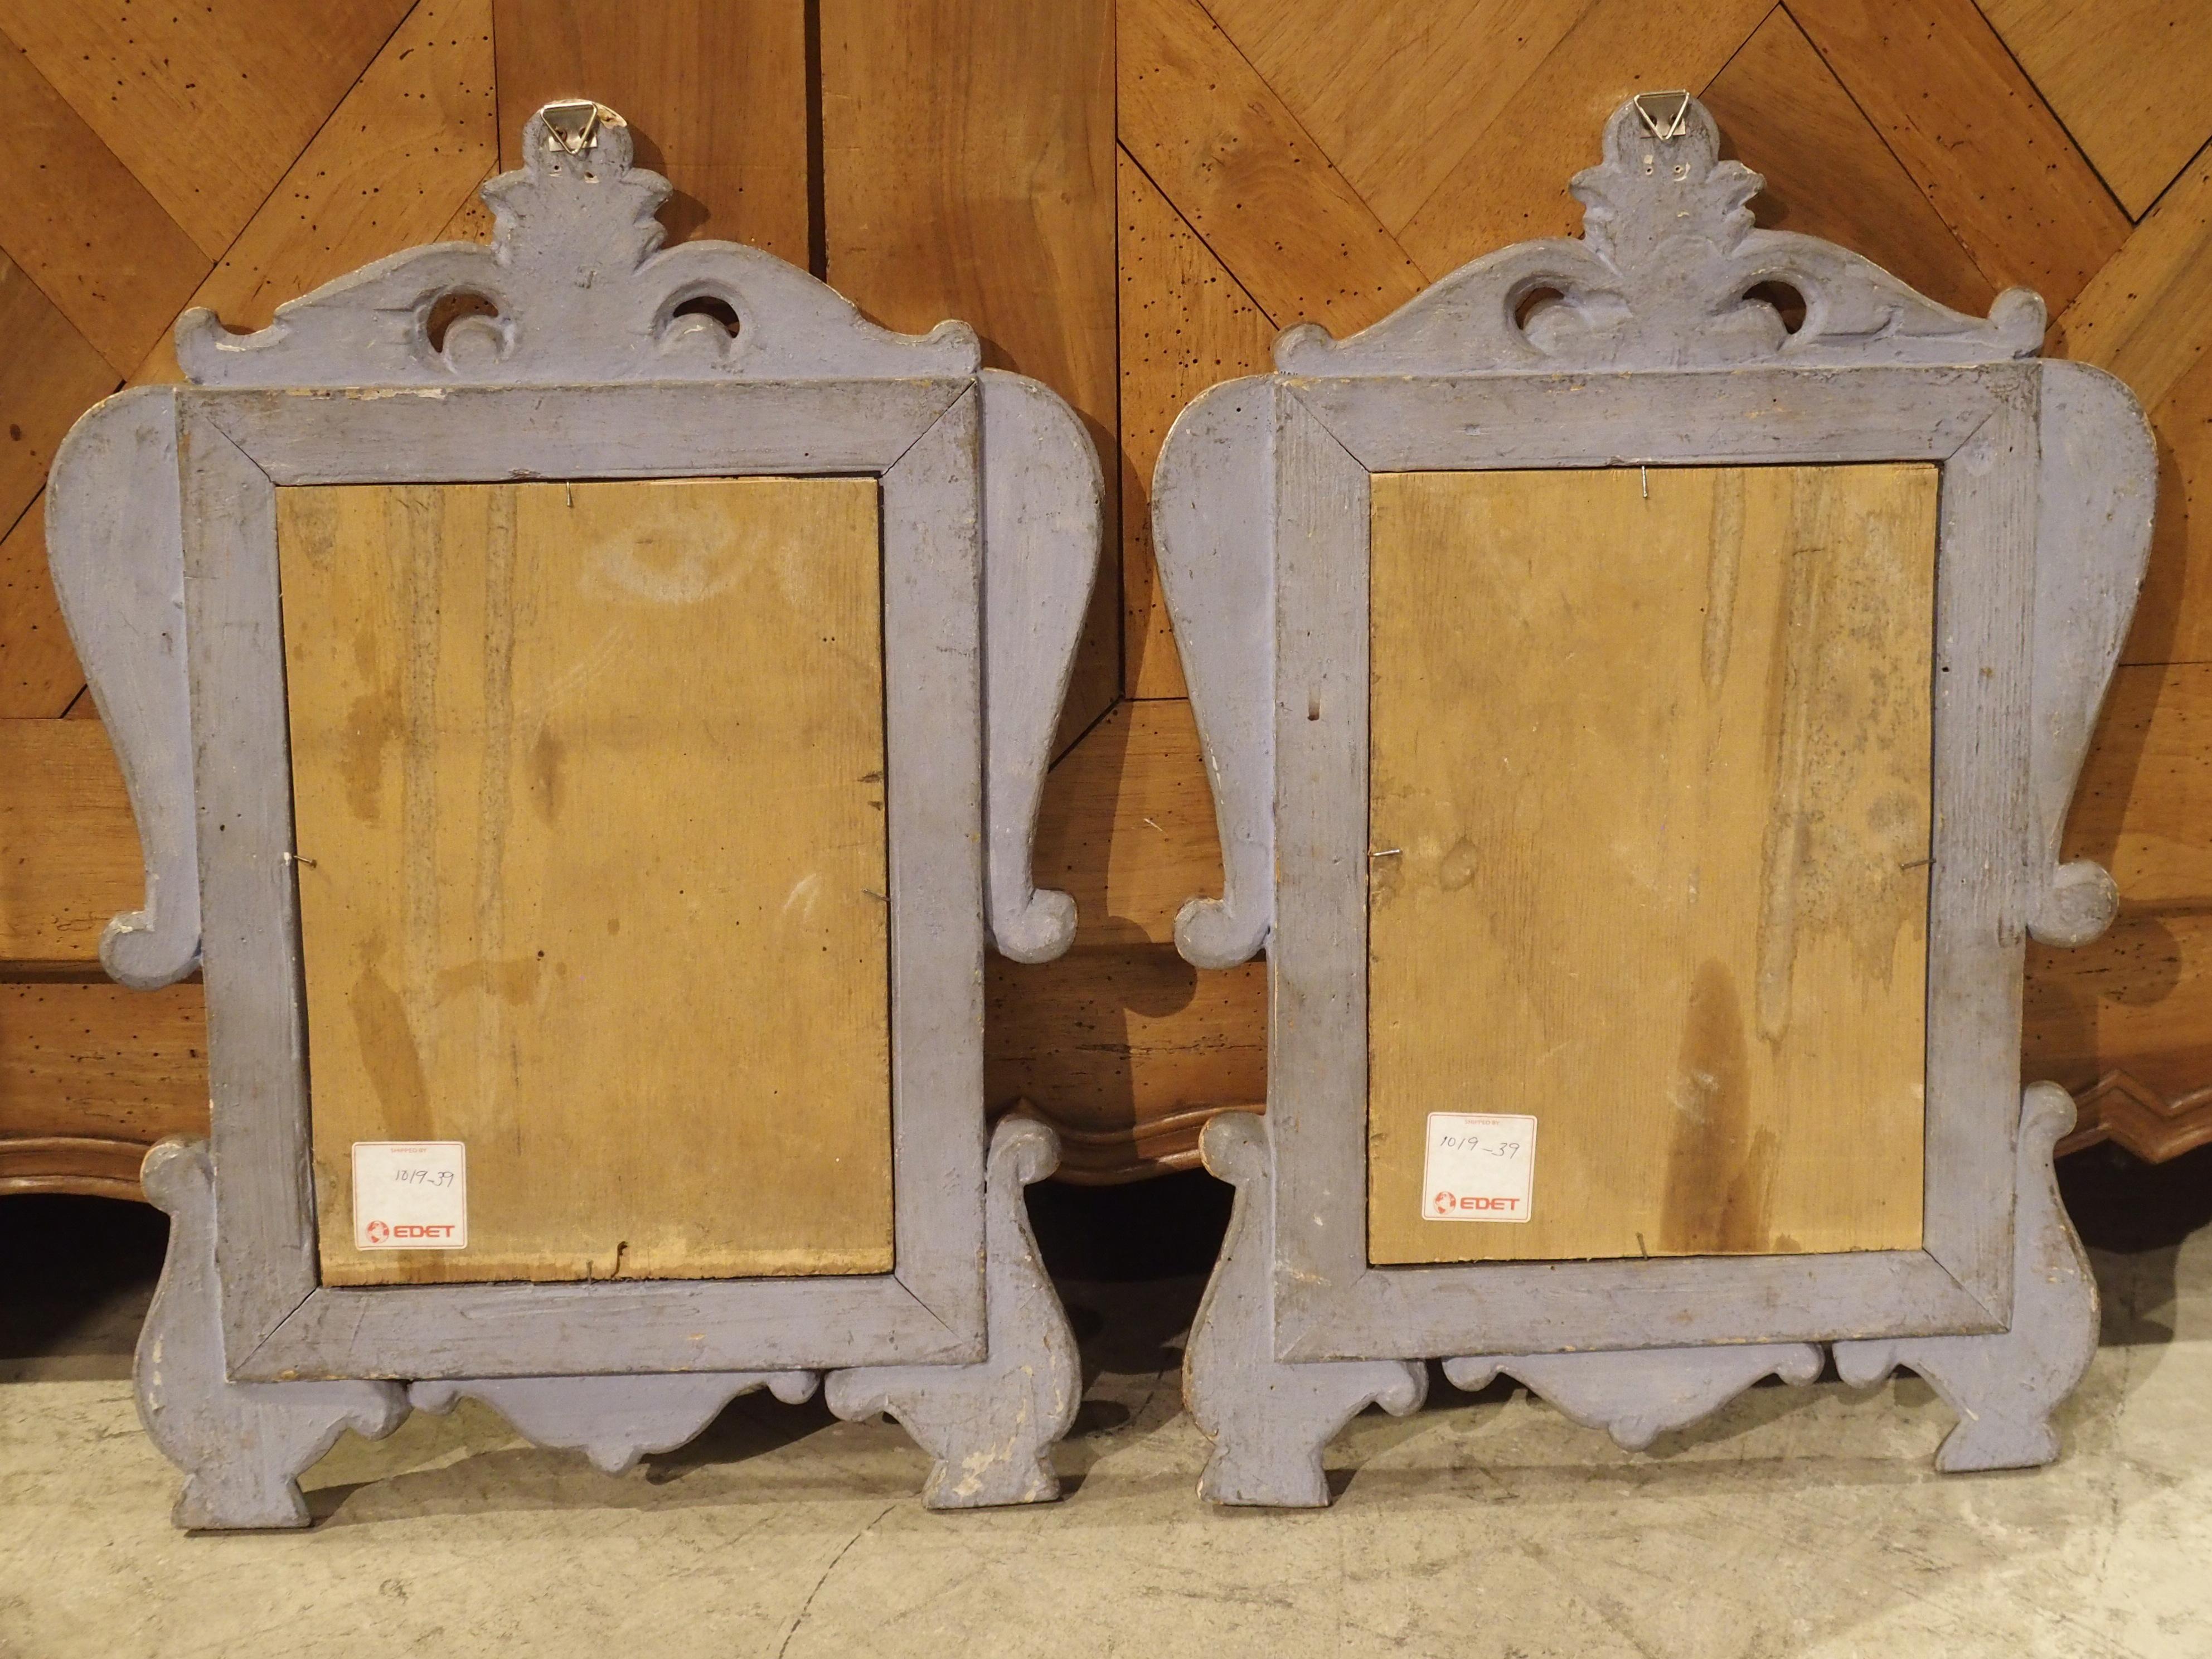 These small and decorative wall mirrors are from Italy and date to the late 1700s. They have a simple rectilinear form adorned with carved scrolling motifs on the crown, at the shoulders, and flanking the lower corners. A small, stylized